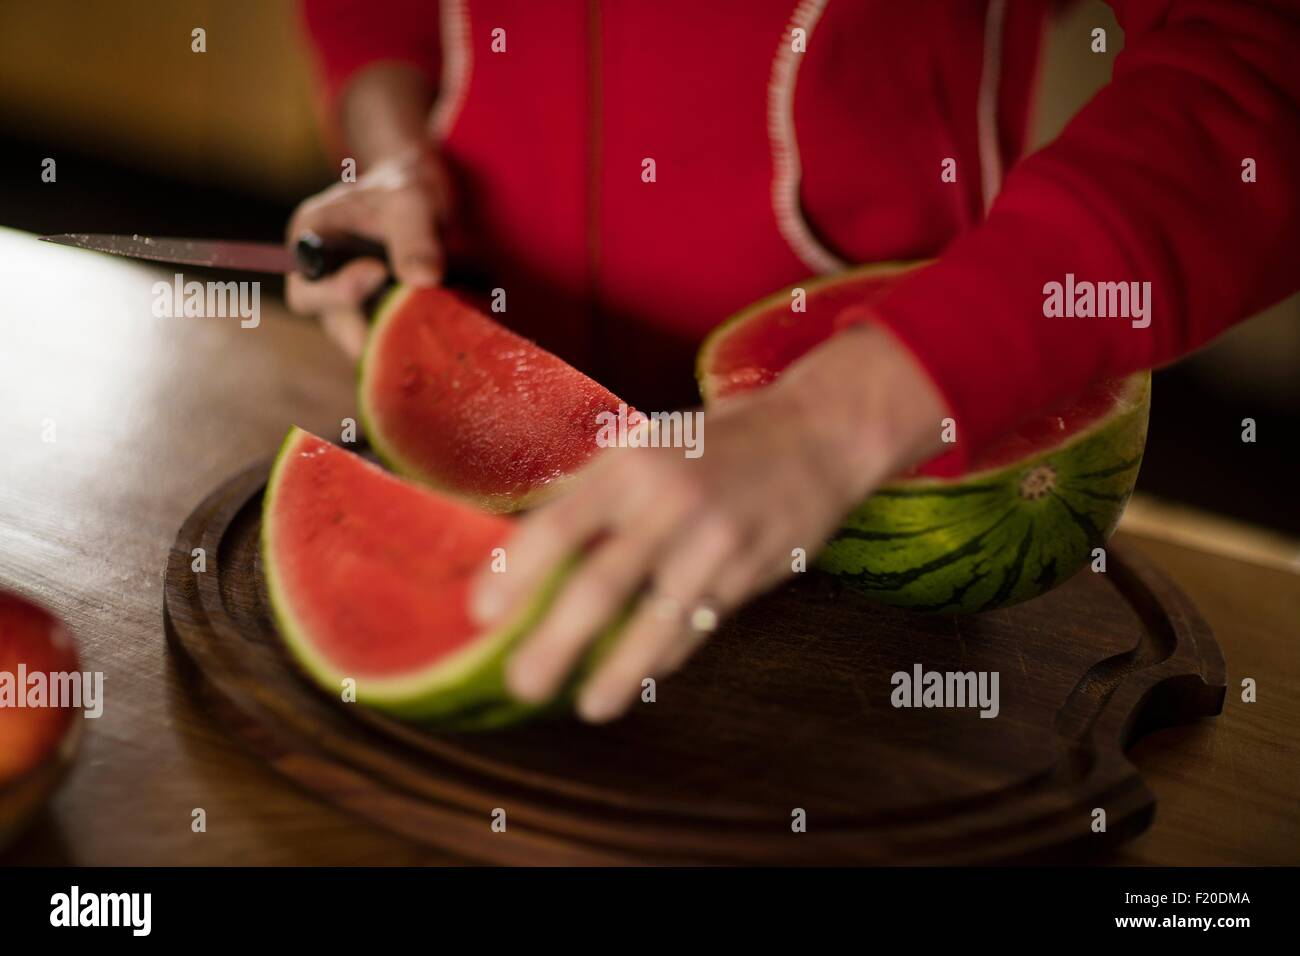 Portrait of mature woman slicing watermelon in kitchen Banque D'Images